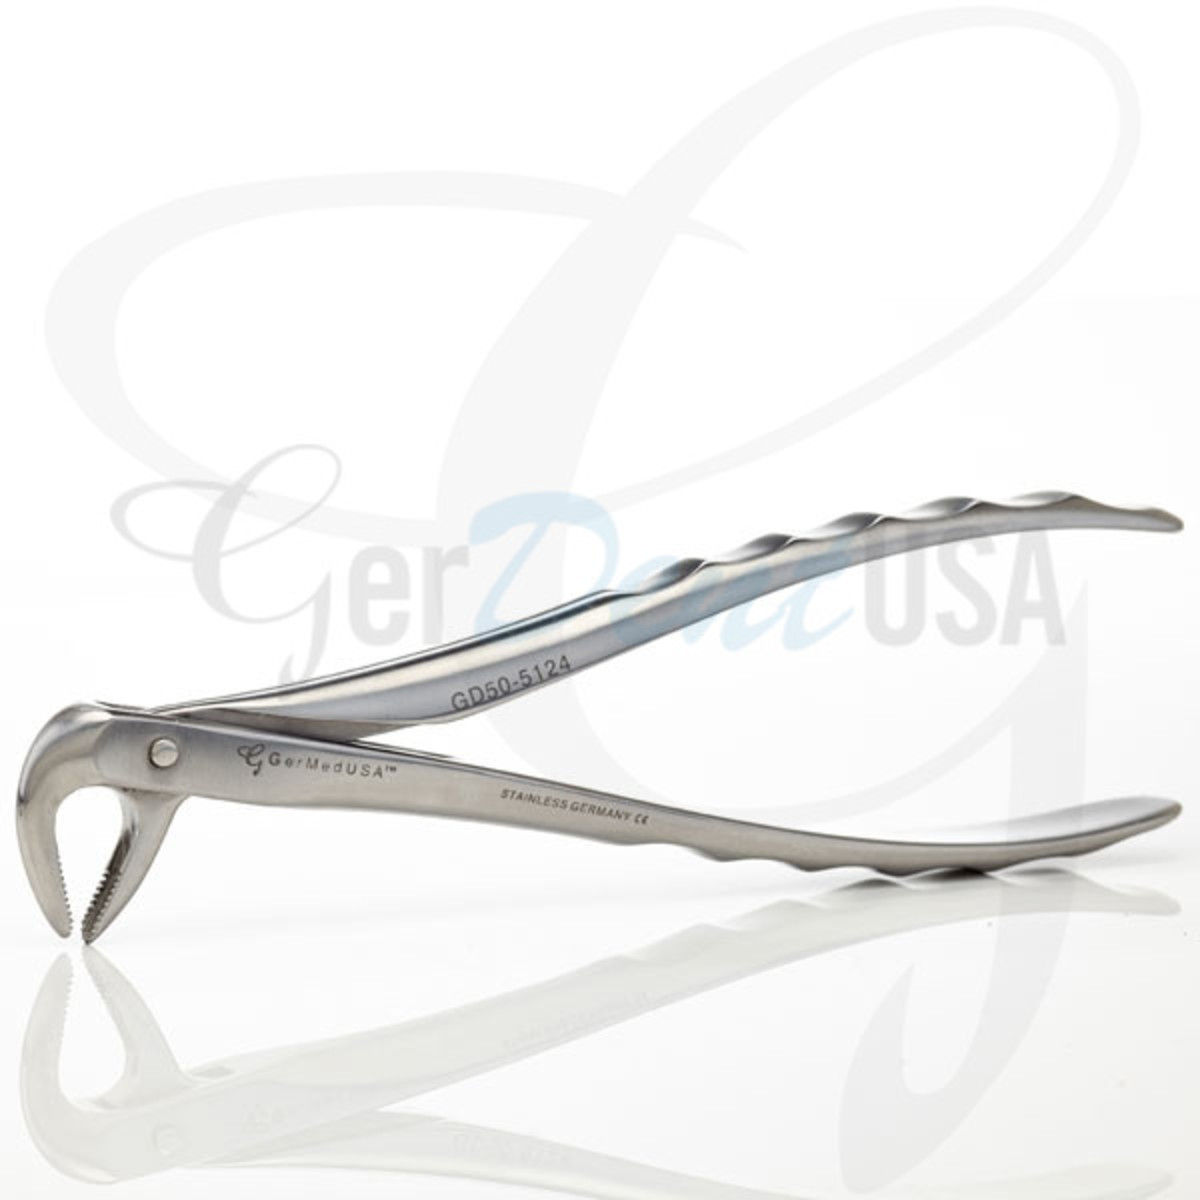 Things You Should Know About Dental Forceps